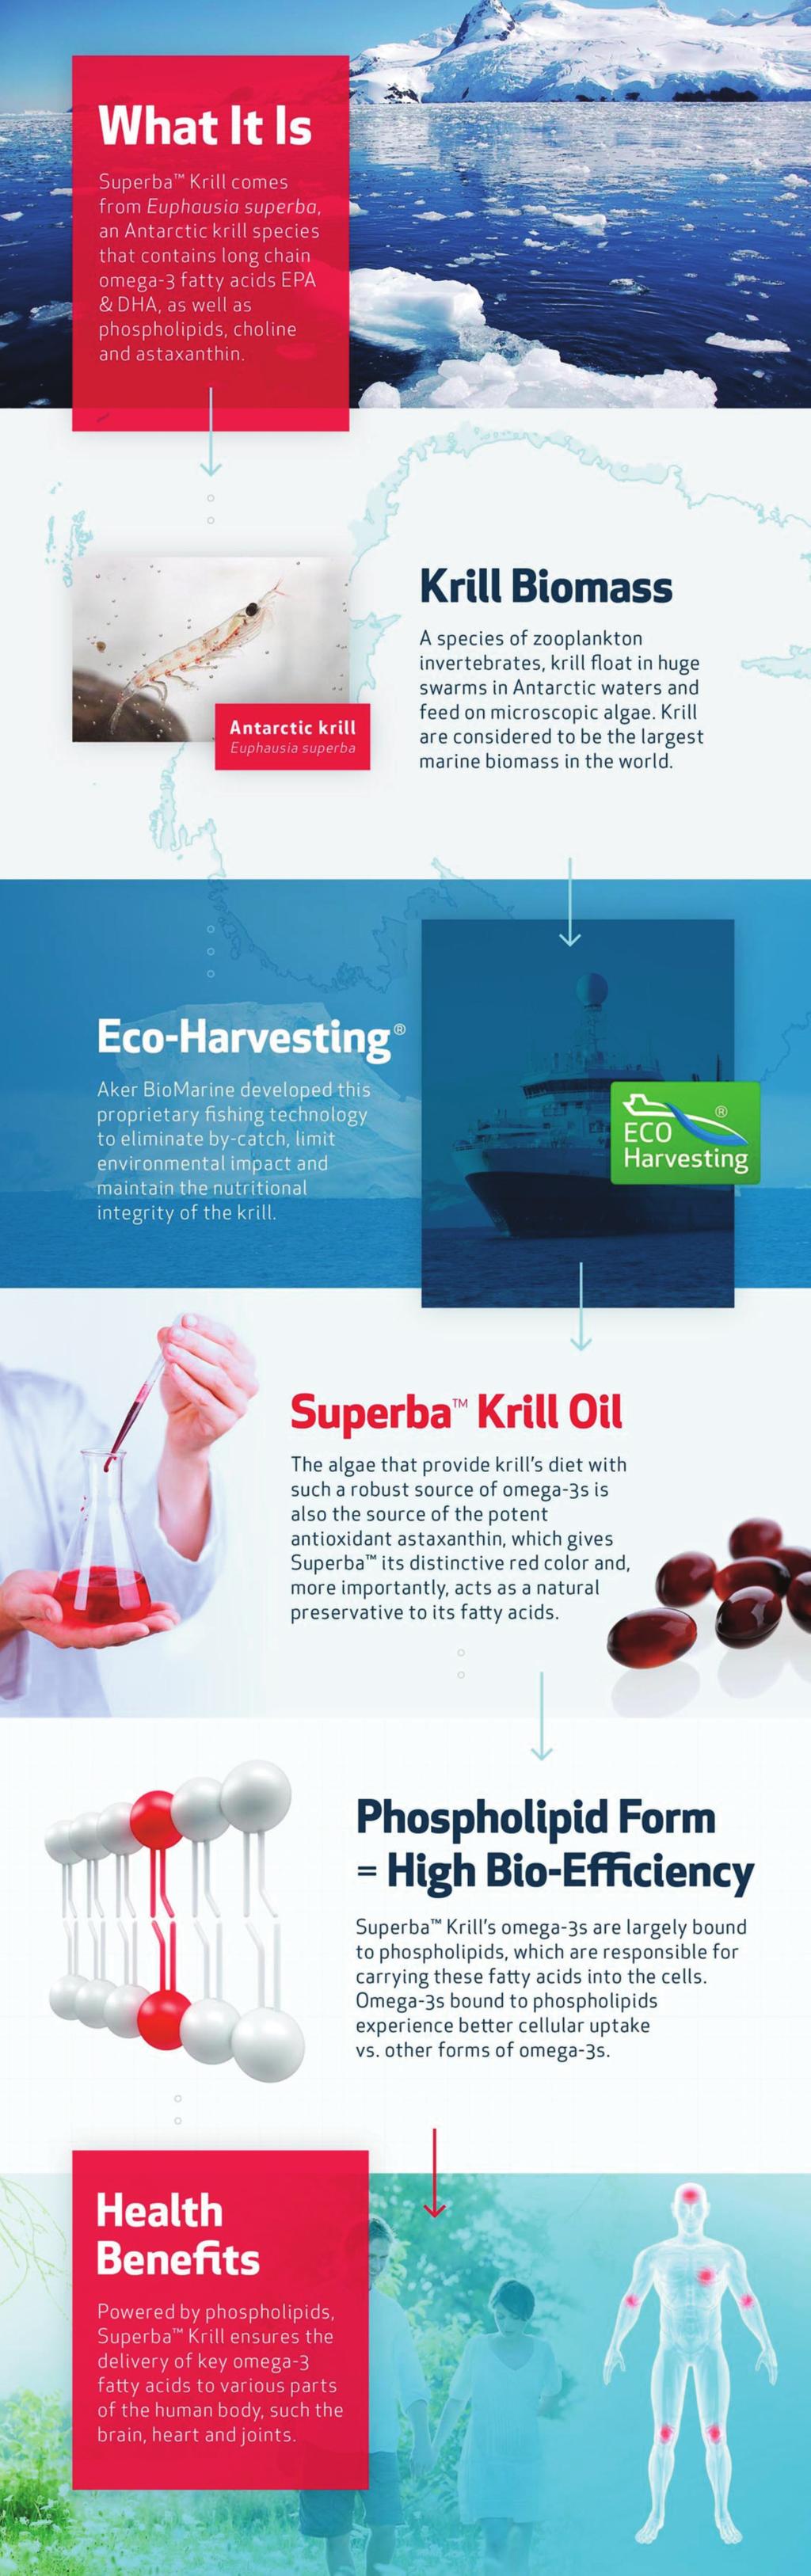 Recognized for its health-promoting suppression of free radicals, astaxanthin keeps Superba Krill fresh, protecting the omega-3 fa y acids from oxidation, which means no additives are necessary to